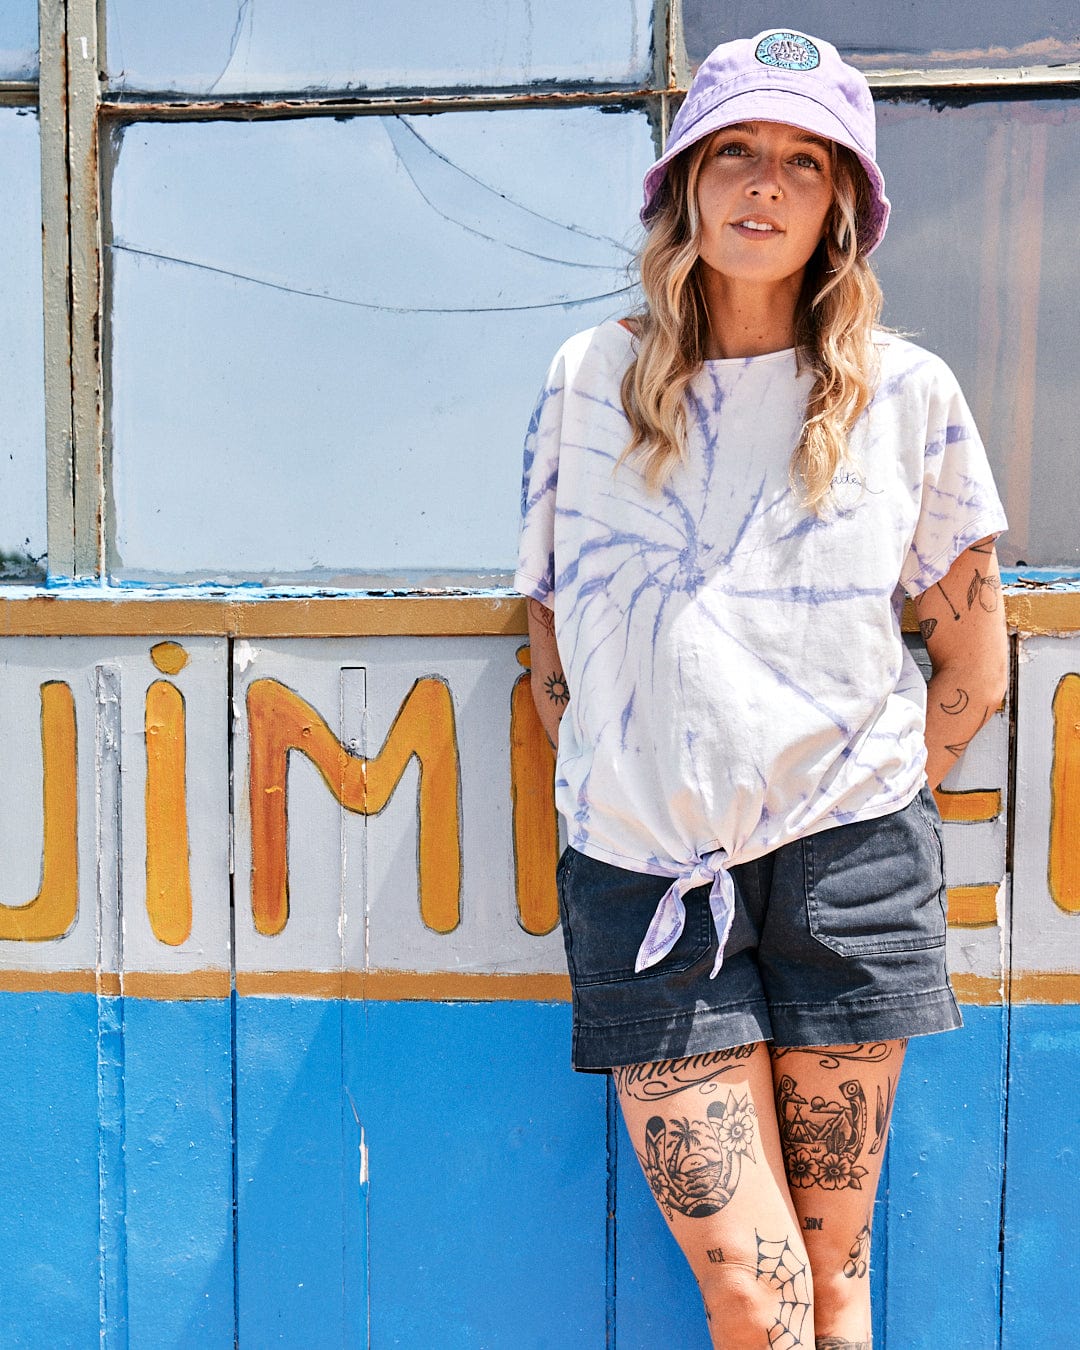 Woman in a Saltrock White/Purple Swirl - Womens Short Sleeve T-Shirt and denim shorts stands in front of a colorful vintage truck, wearing a purple hat, showcasing tattooed legs.